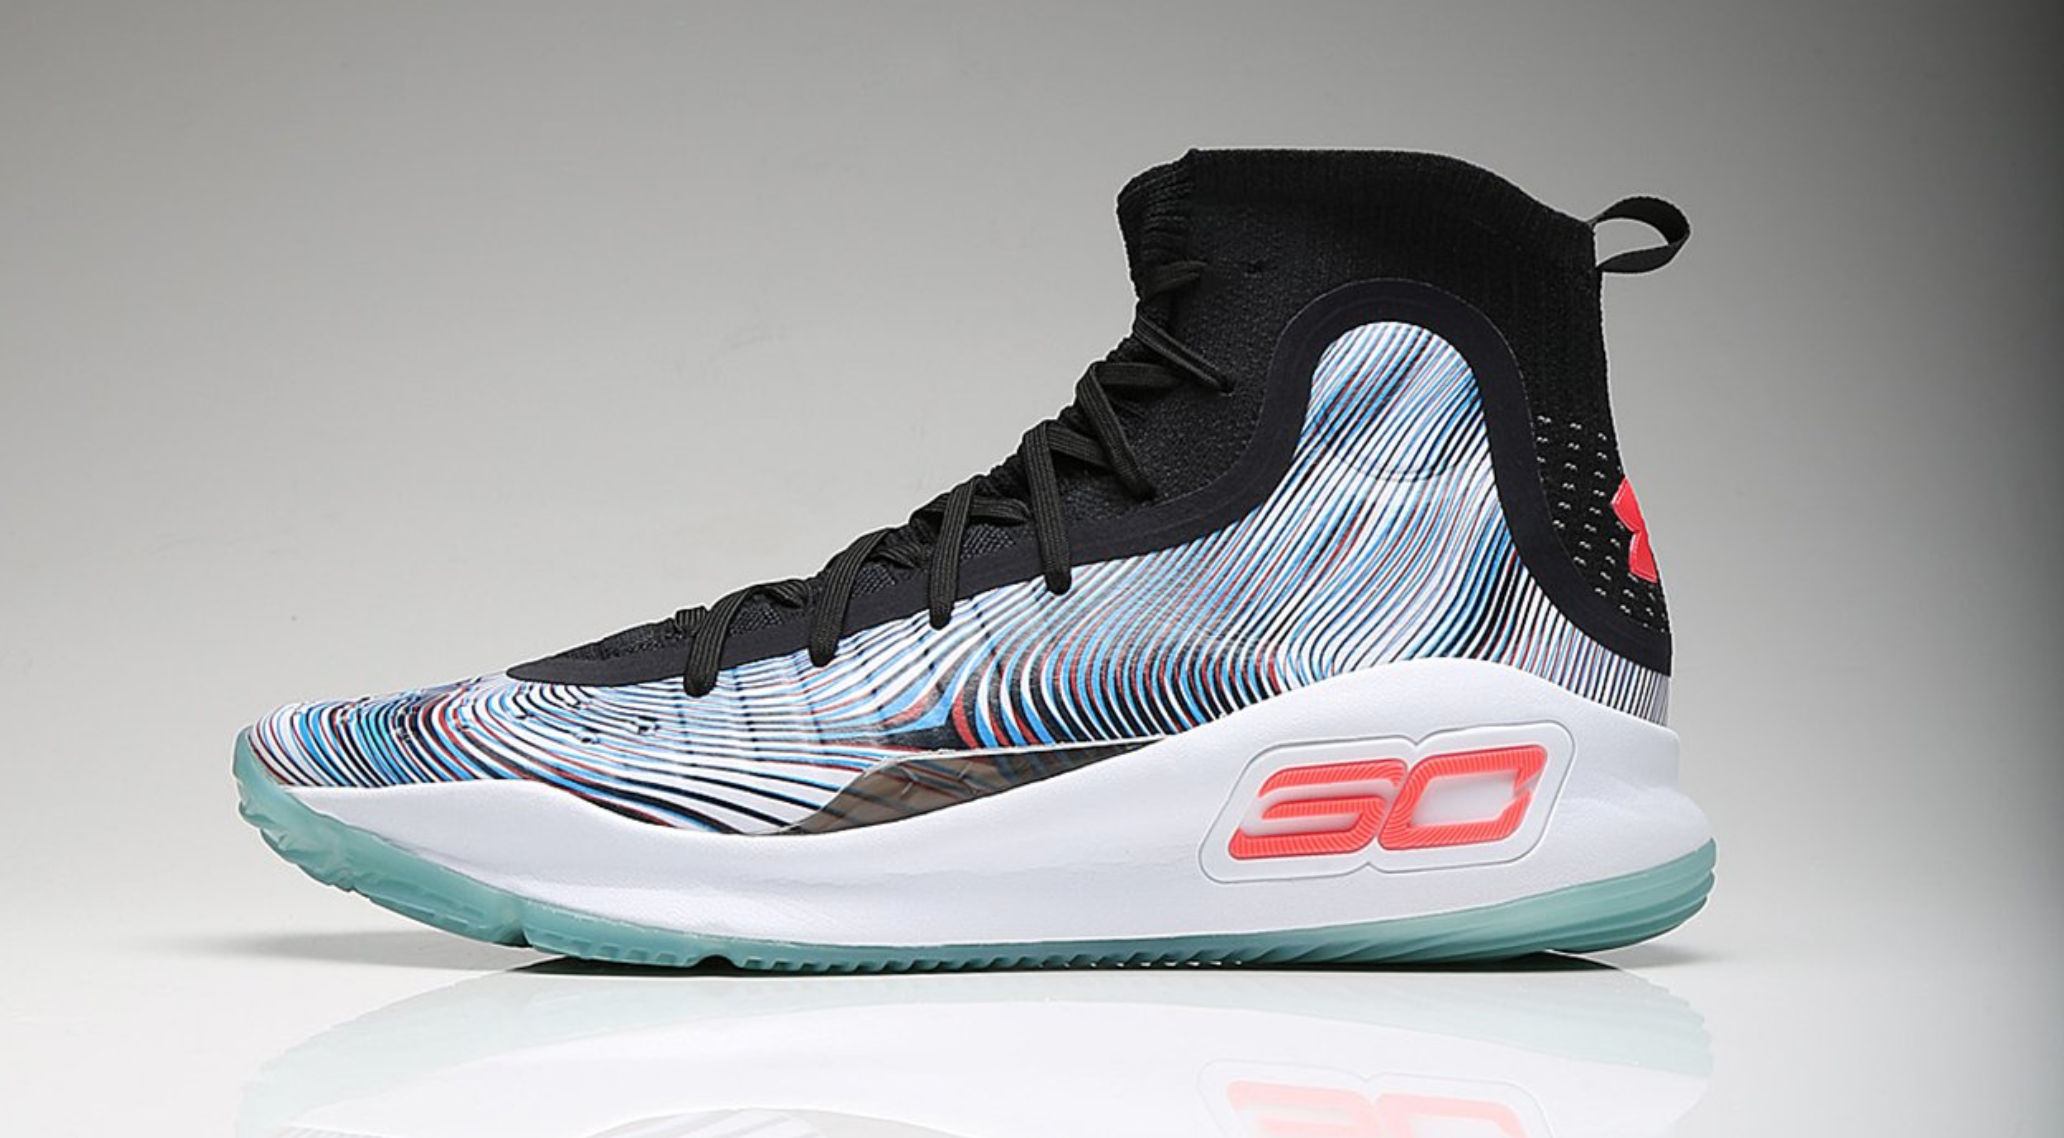 Steph Curry’s New Under Armour Shoe Launches Tomorrow Cassius born